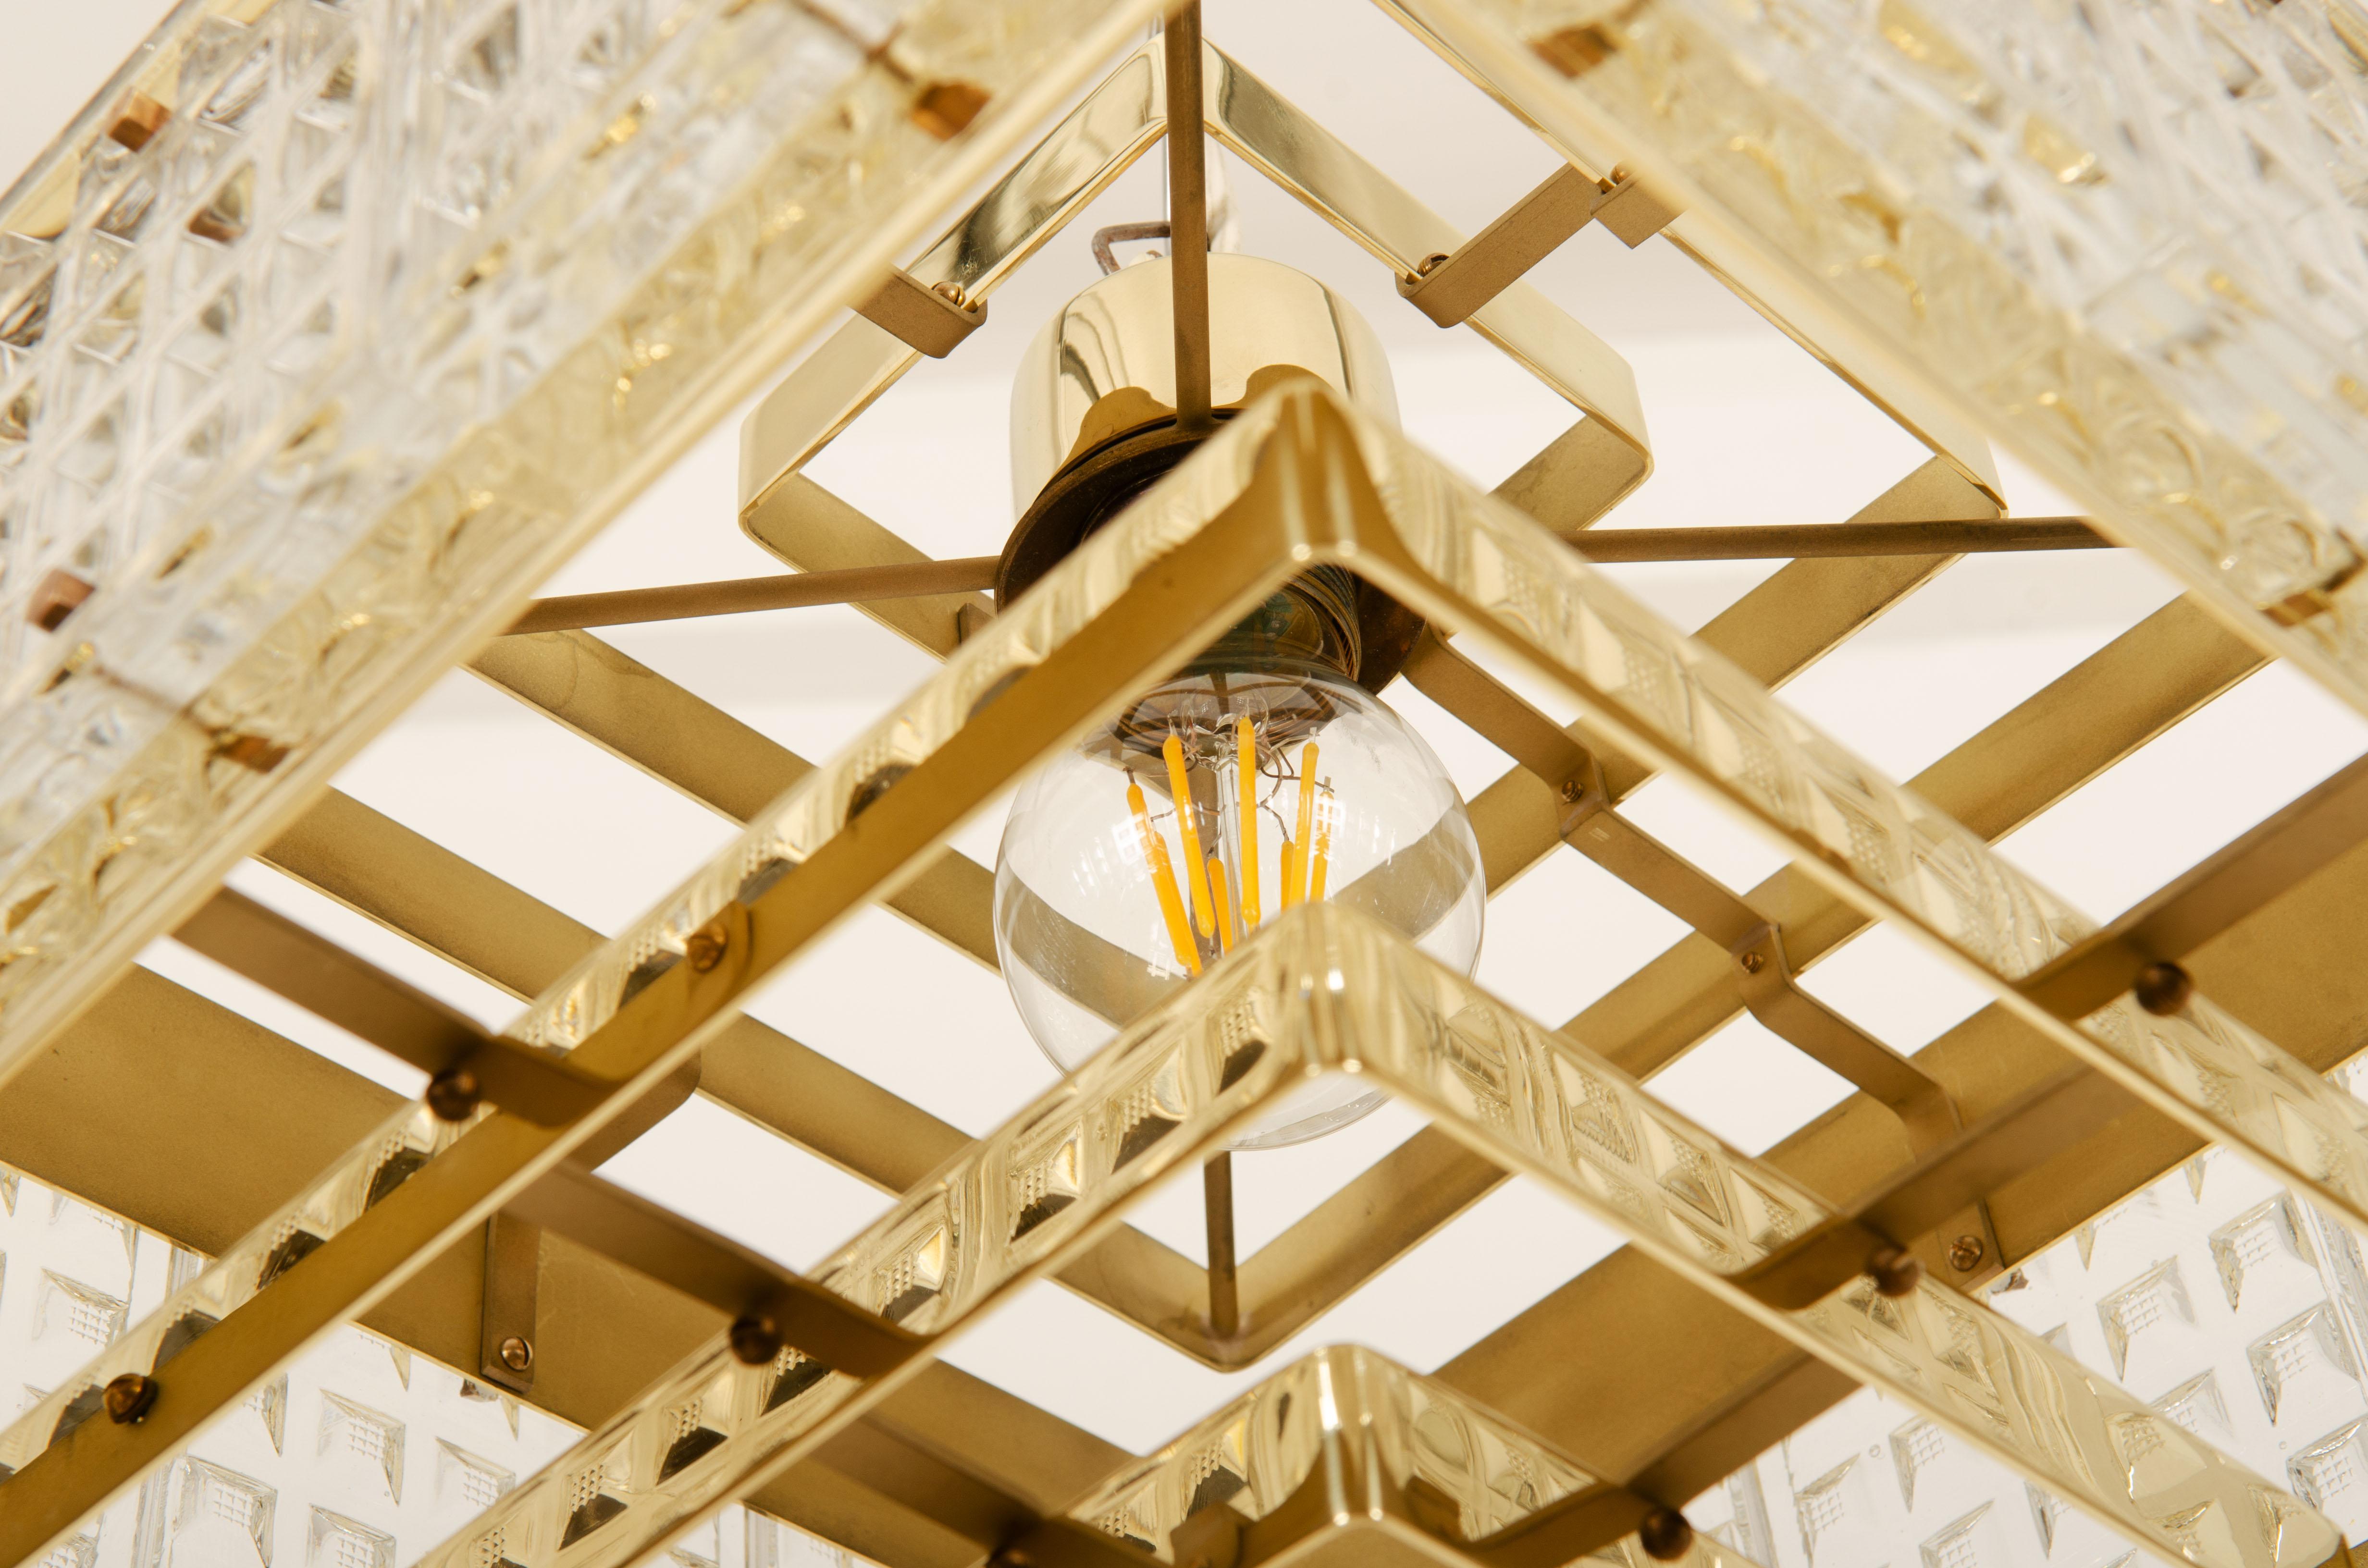 Pressed Brass and Glass Chandelier by Orrefors from the 1960s For Sale